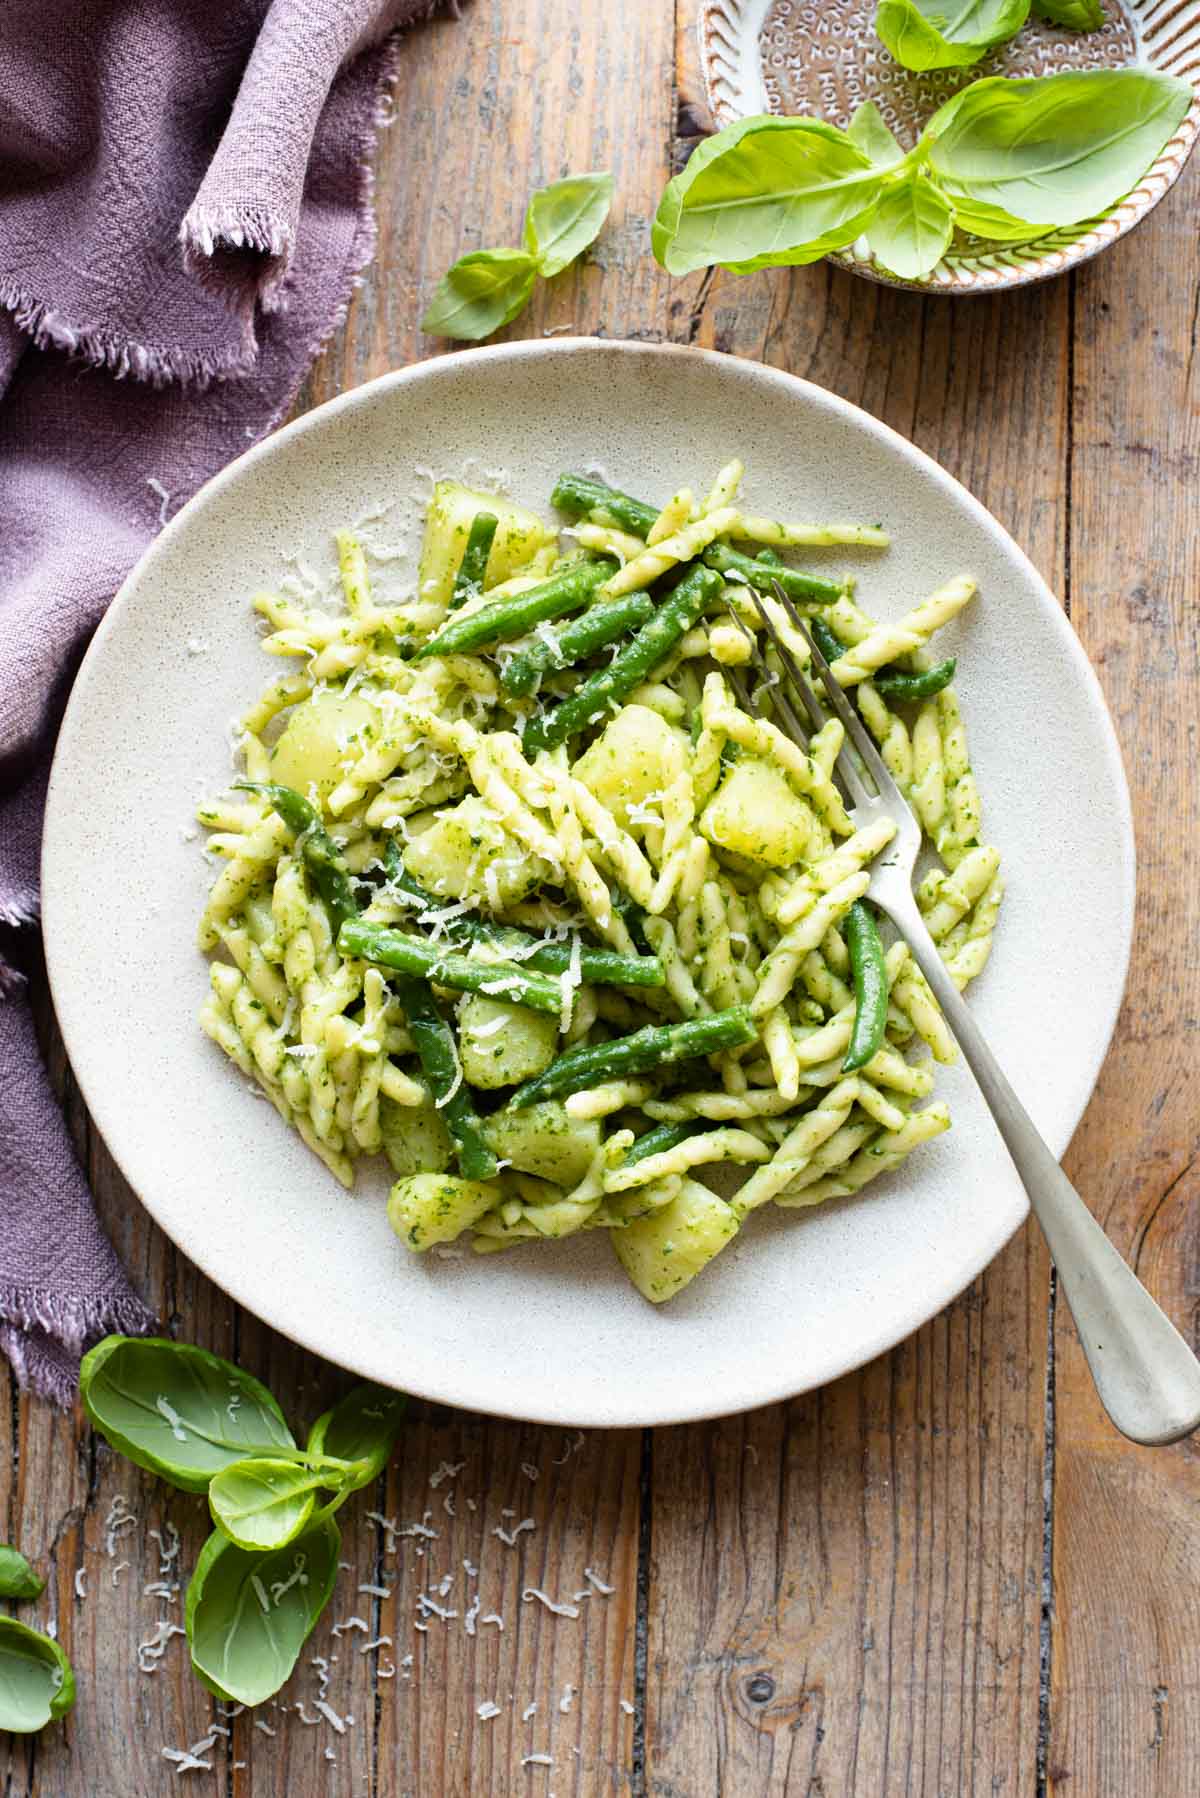 Trofie pasta with pesto, potatoes and green beans on a plate sitting on a wooden surface